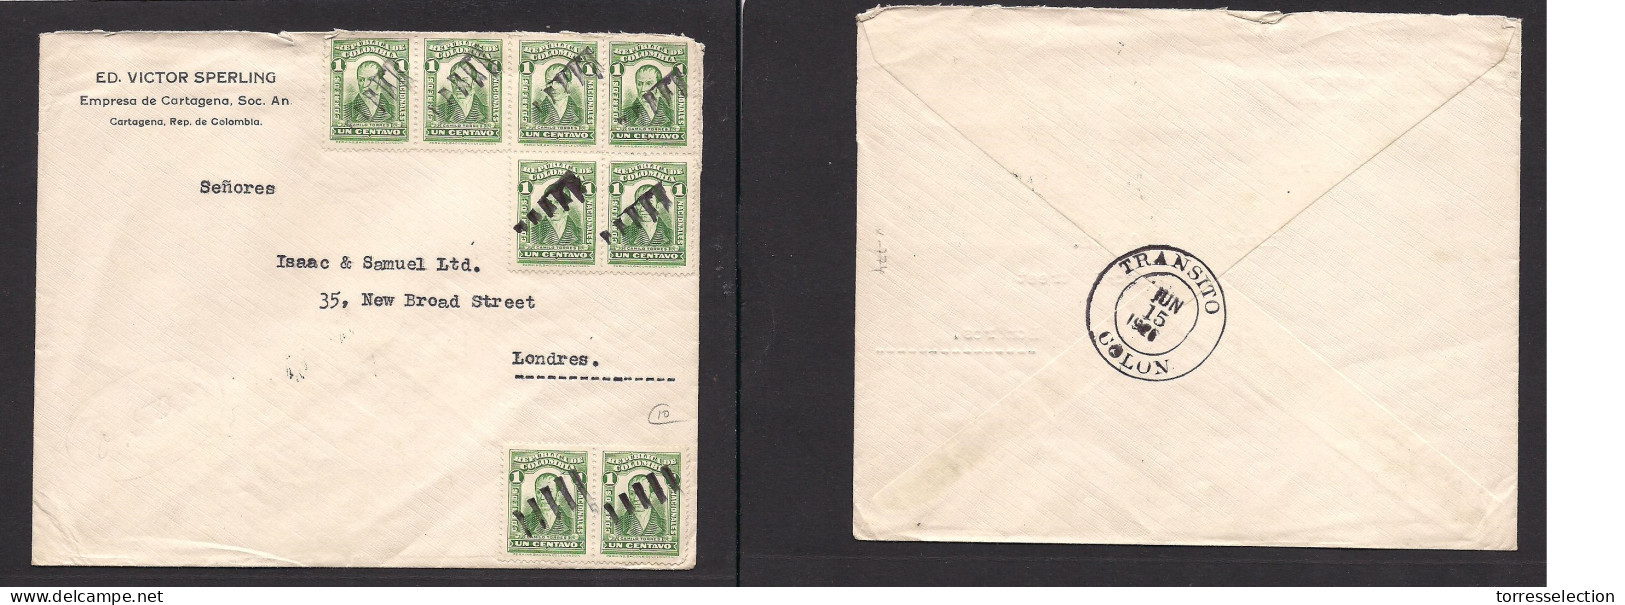 COLOMBIA. Colombia - Cover - 1926 Cartagena To UK London Multifkd Env V Nice Item, Via Colon. Easy Deal. - Colombia